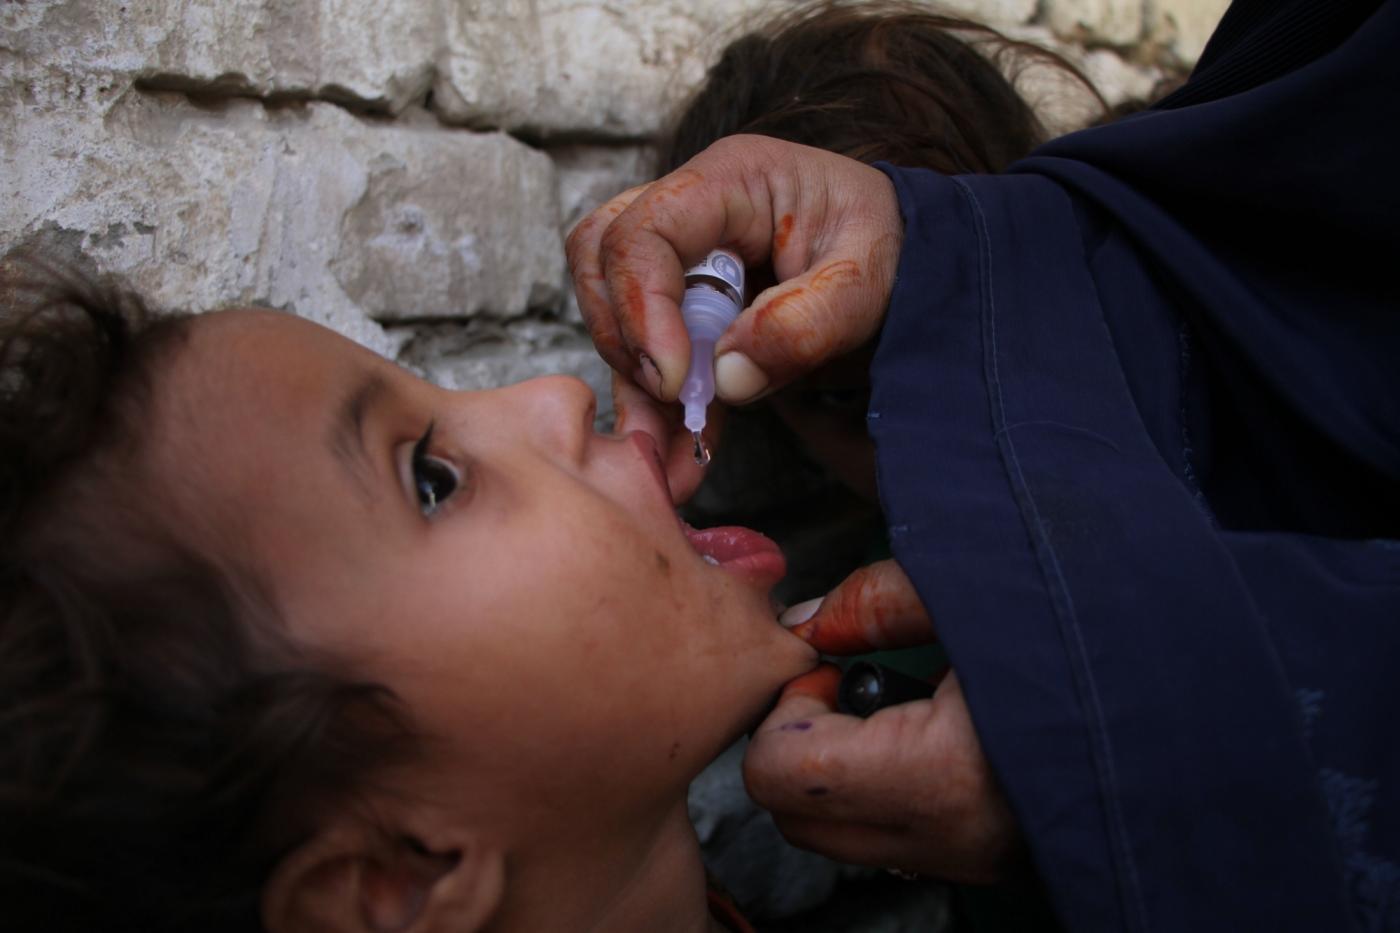 JALALABAD, Nov. 5, 2018 (Xinhua) -- A health worker gives a polio vaccine to a child during a vaccination campaign in Jalalabad city, capital of Nangarhar province, Afghanistan, Nov. 5, 2018. An anti-polio campaign started in Nangarhar province on Monday.(Xinhua/Saifurahman Safi/IANS) by .